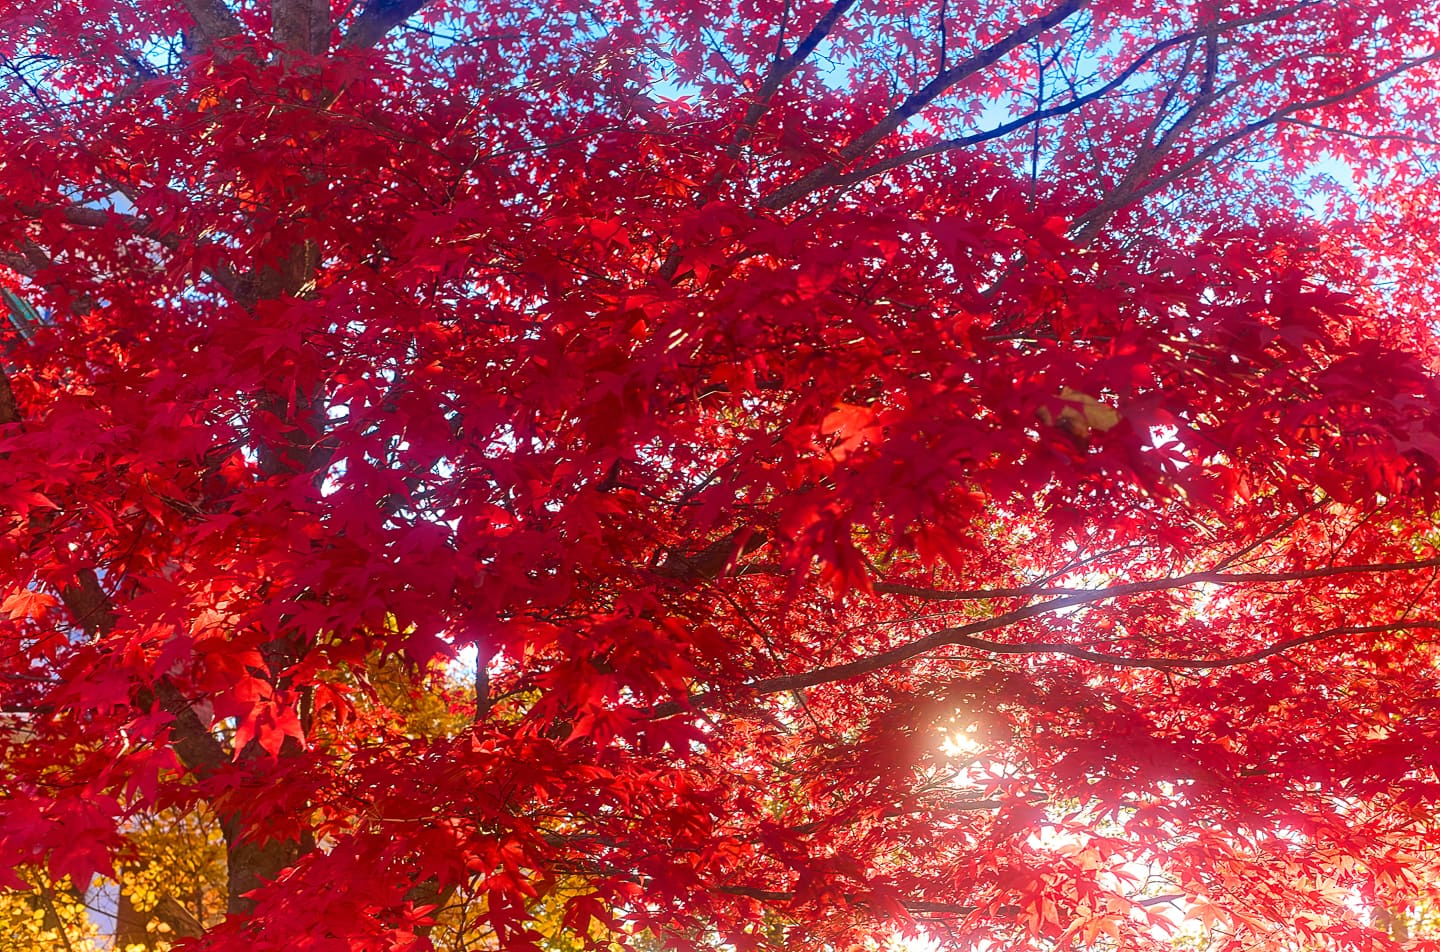 A bloodgood Japanese maple tree that turns red in fall.